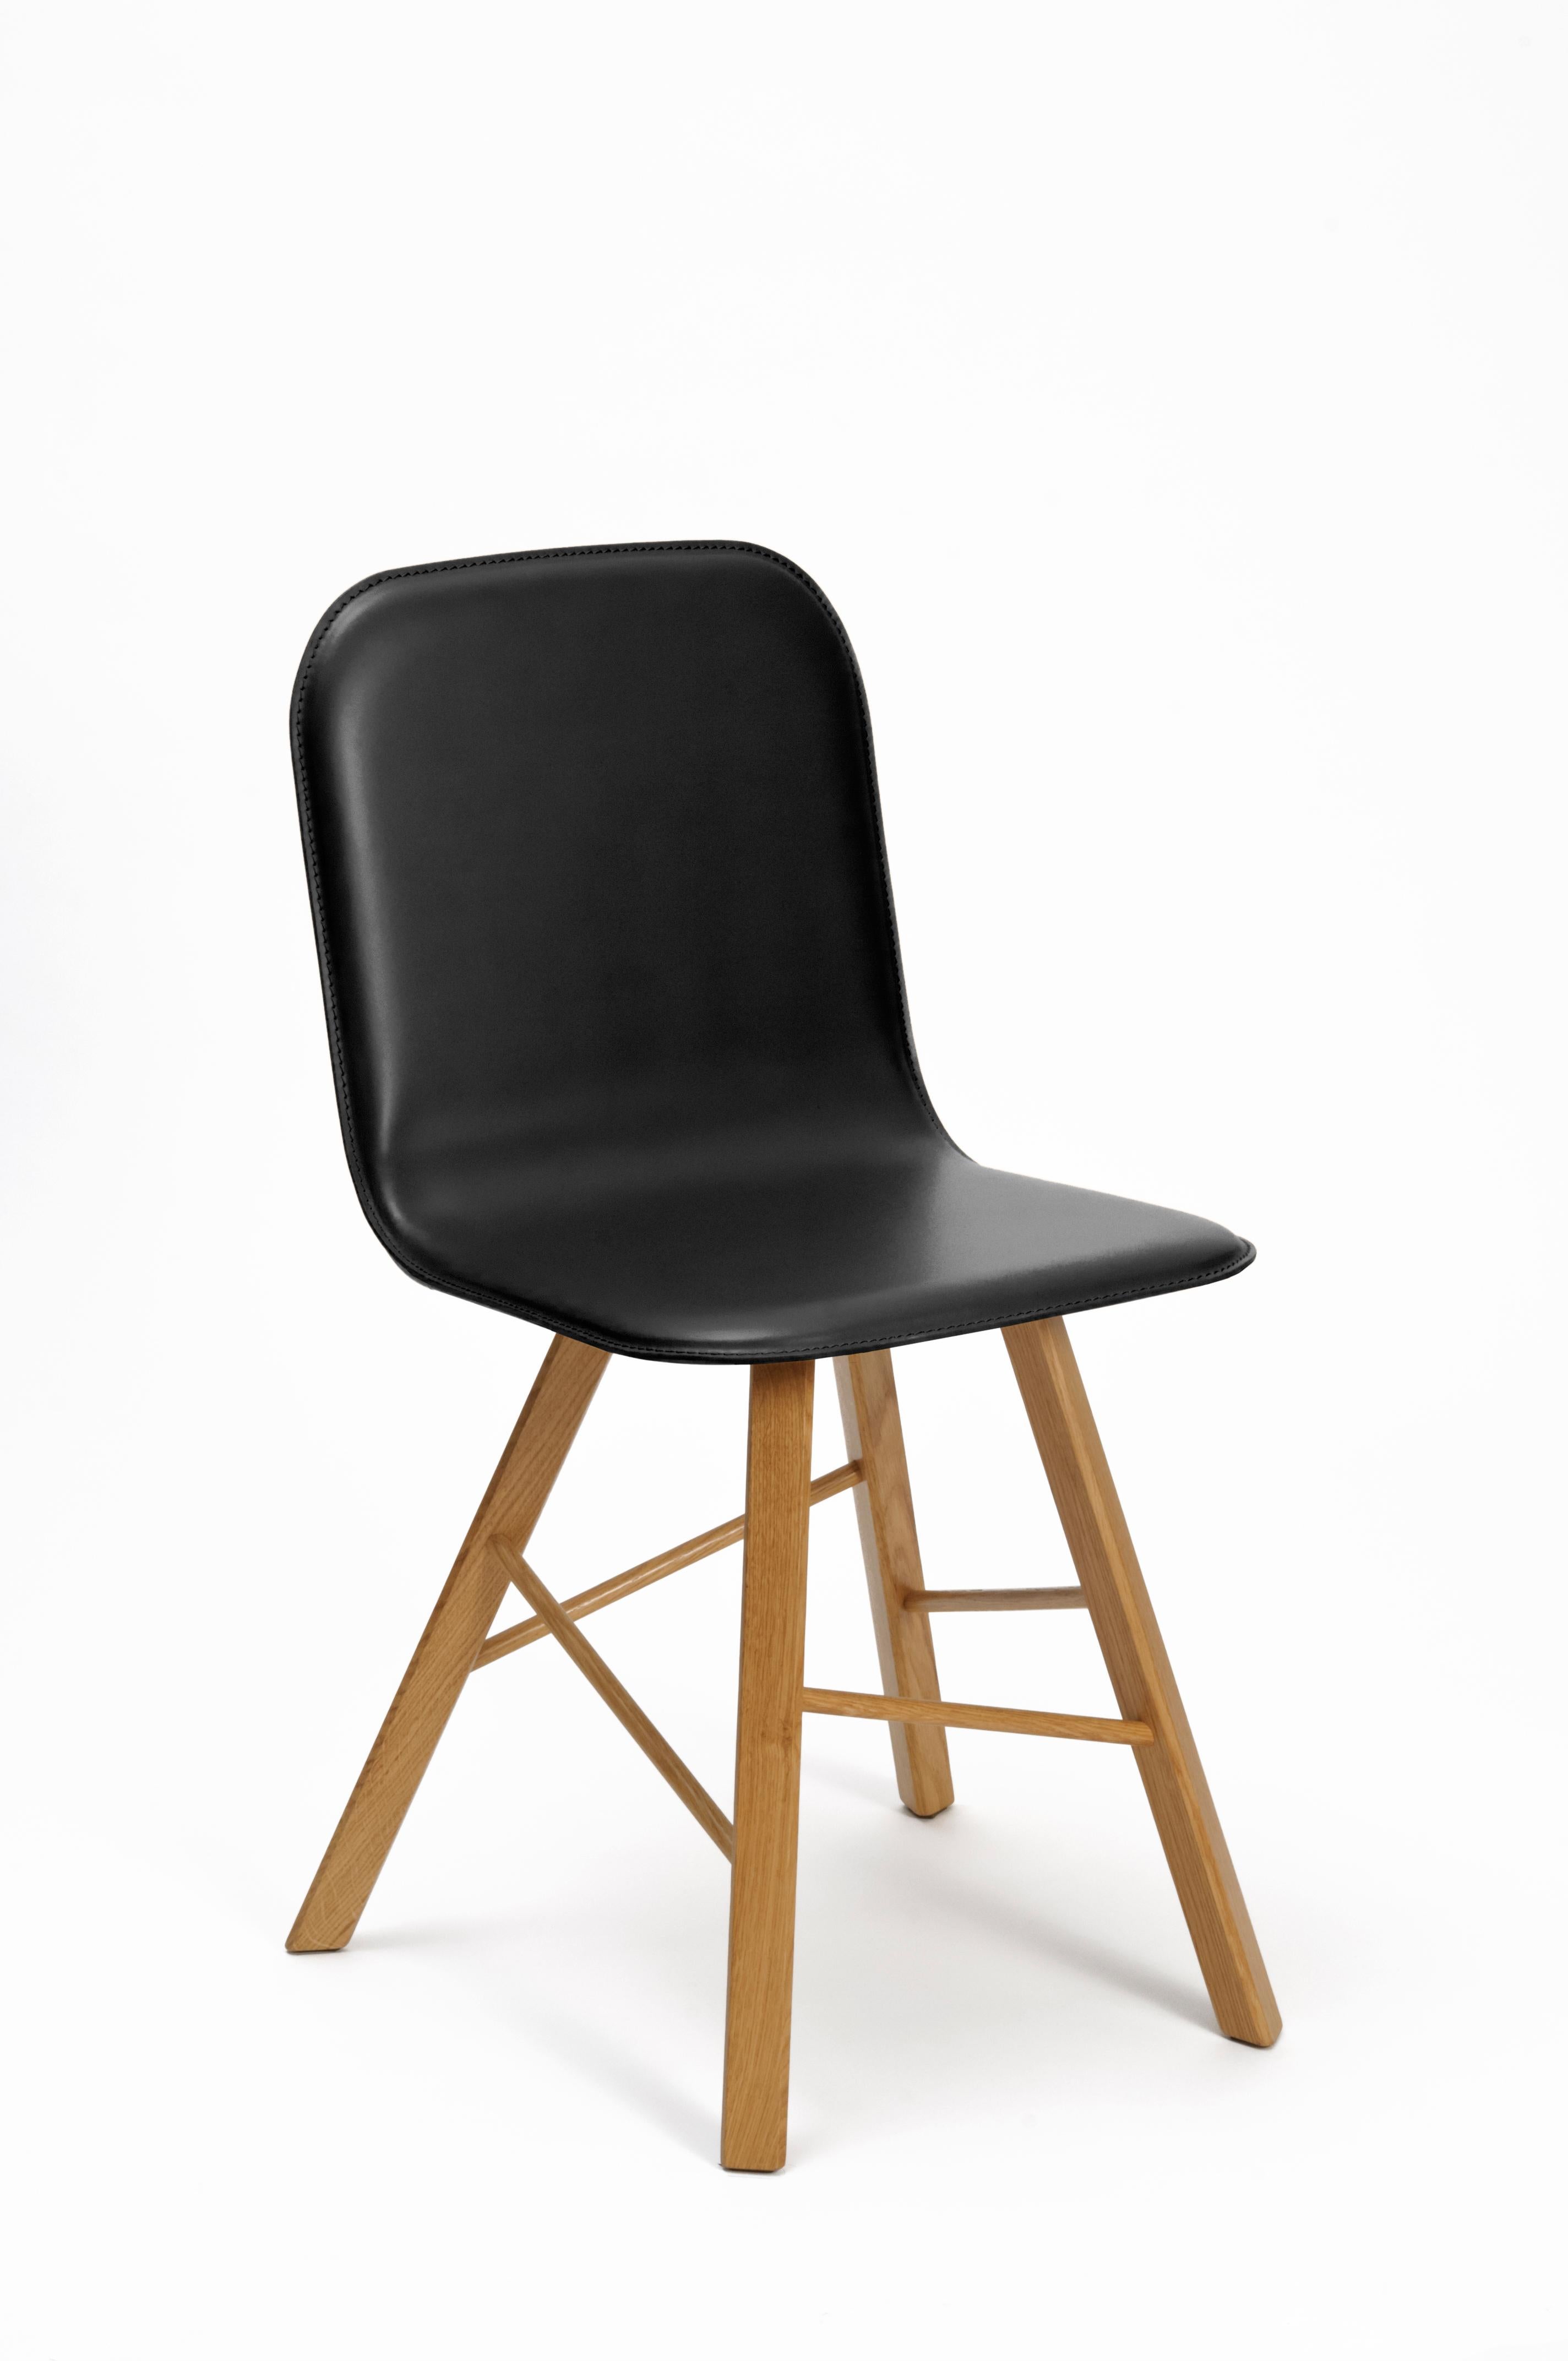 Italian Tria Simple Chair by Colé Natural Leather and oak legs, Minimalist Made in Italy For Sale